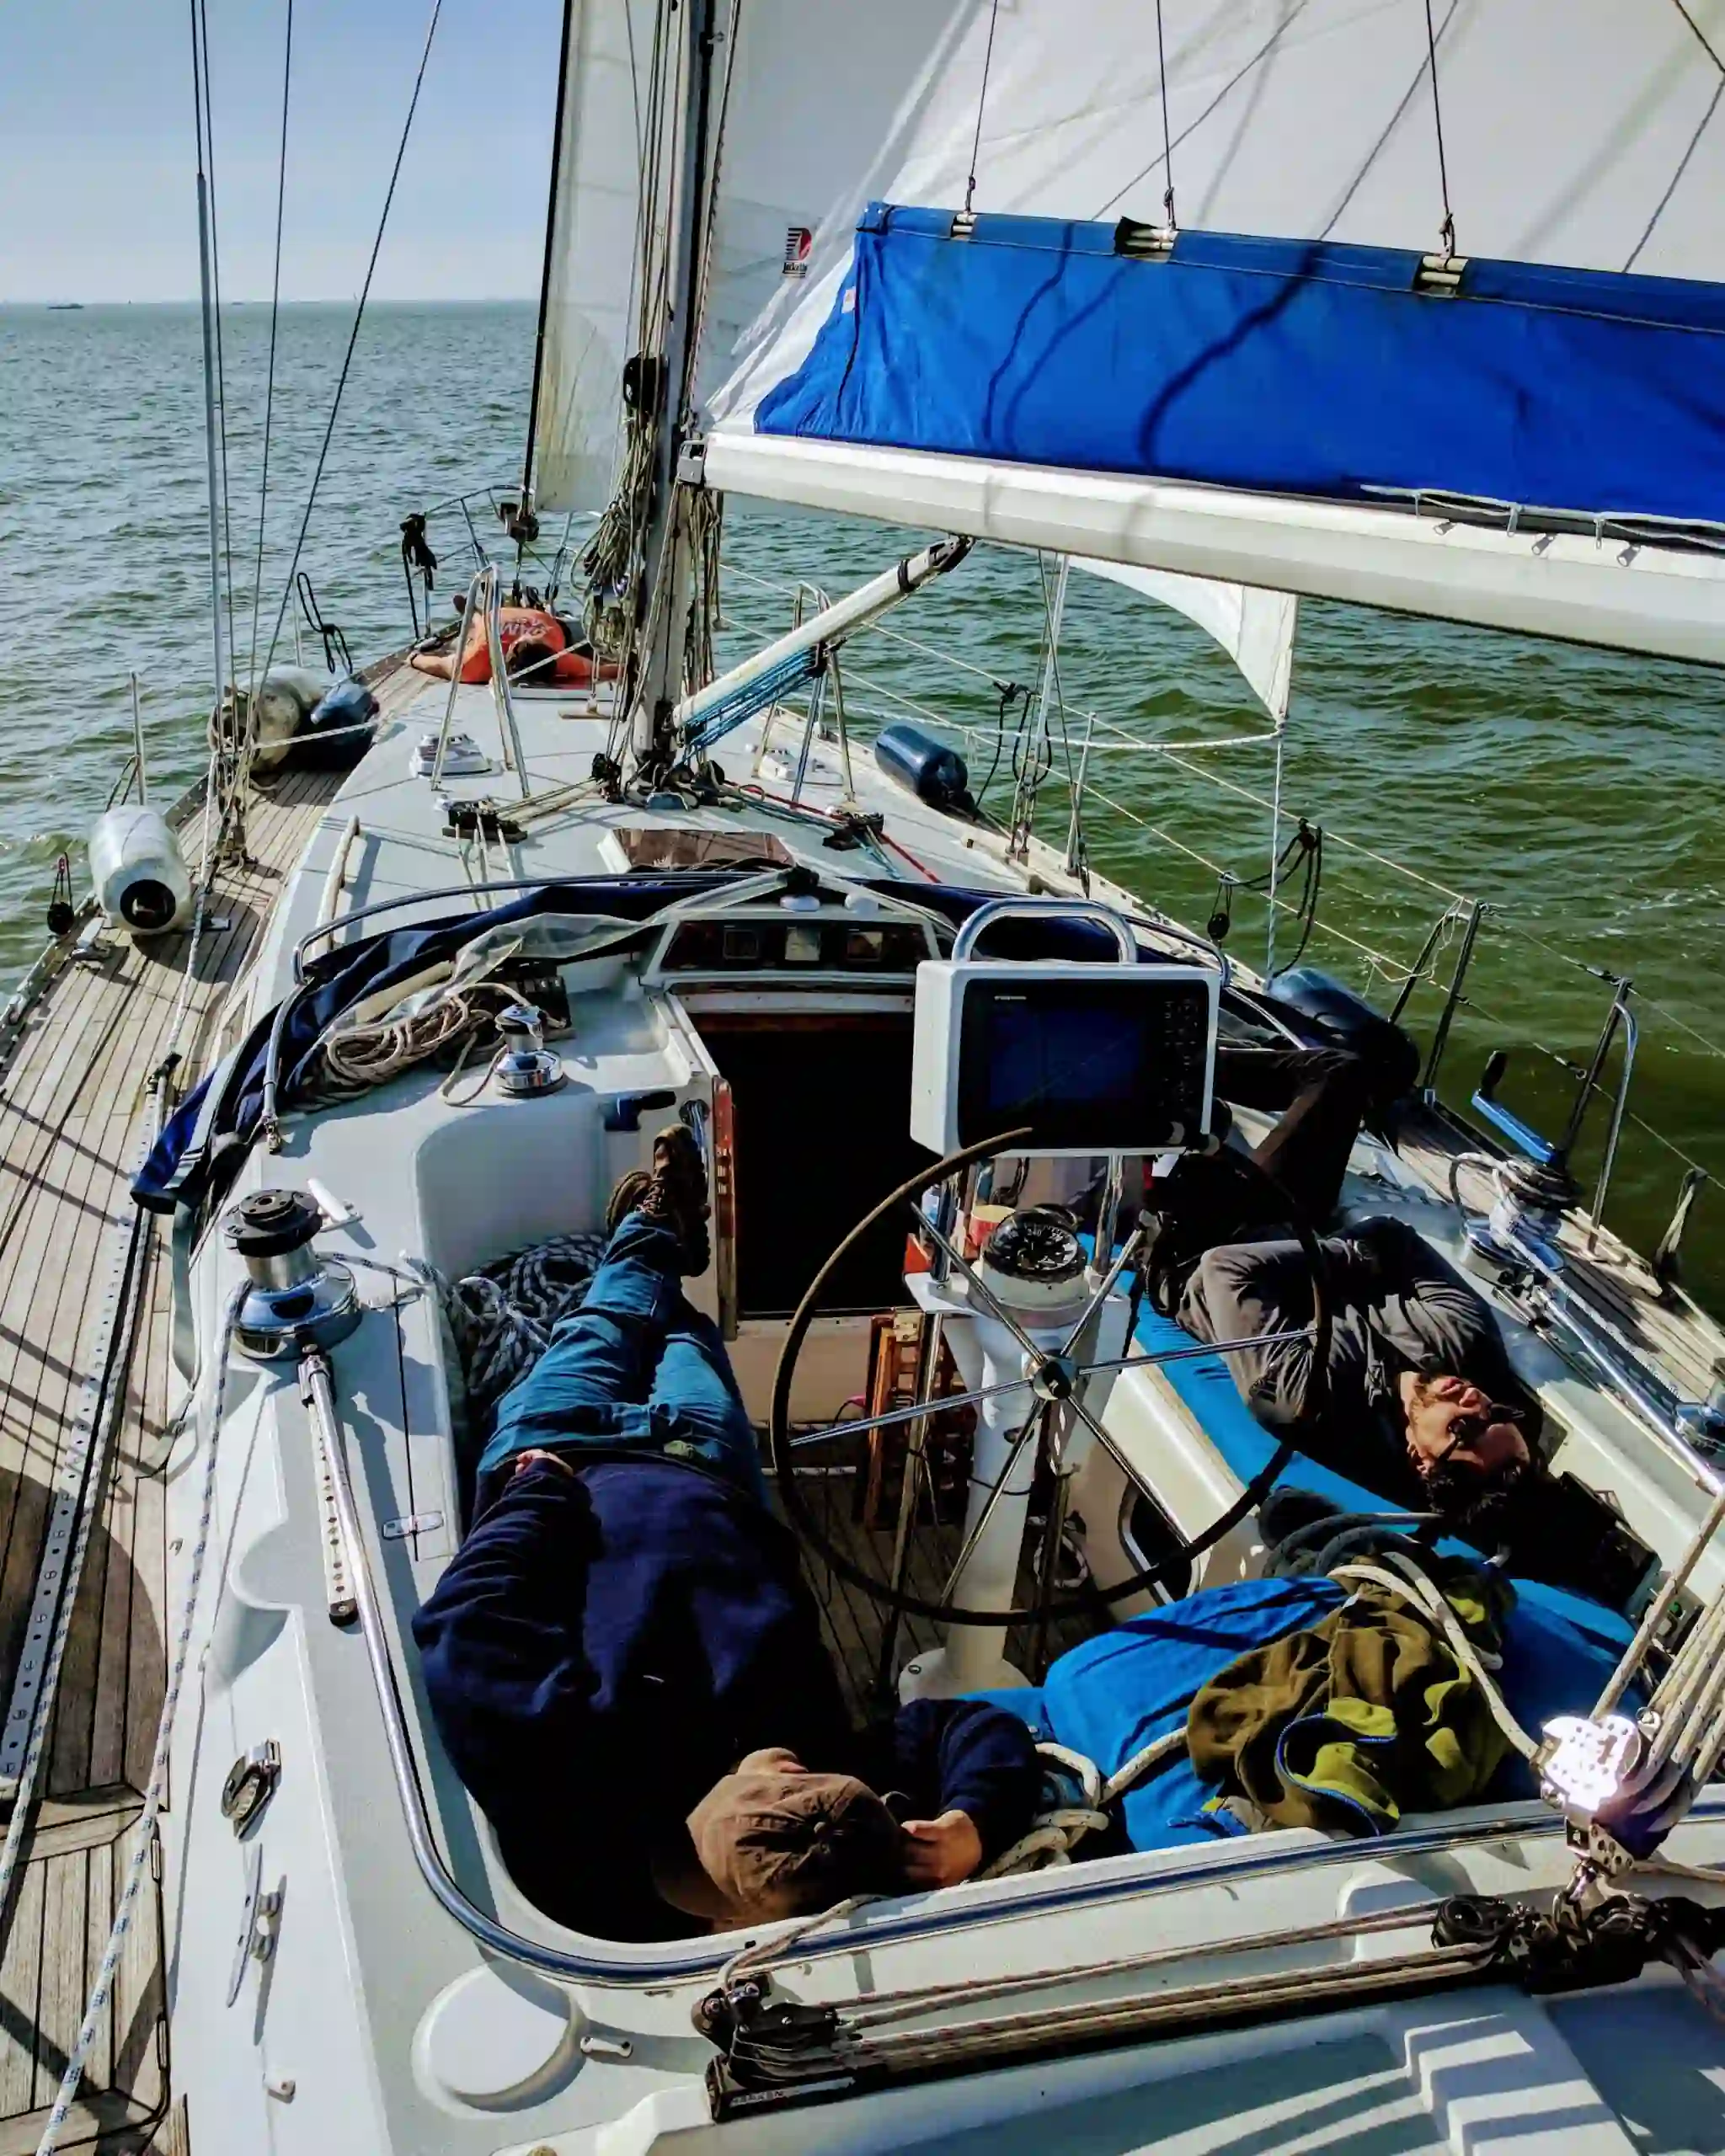 Sailors taking a rest on a sailboat deck with sails hoisted, cruising on Markermeer's gentle waters